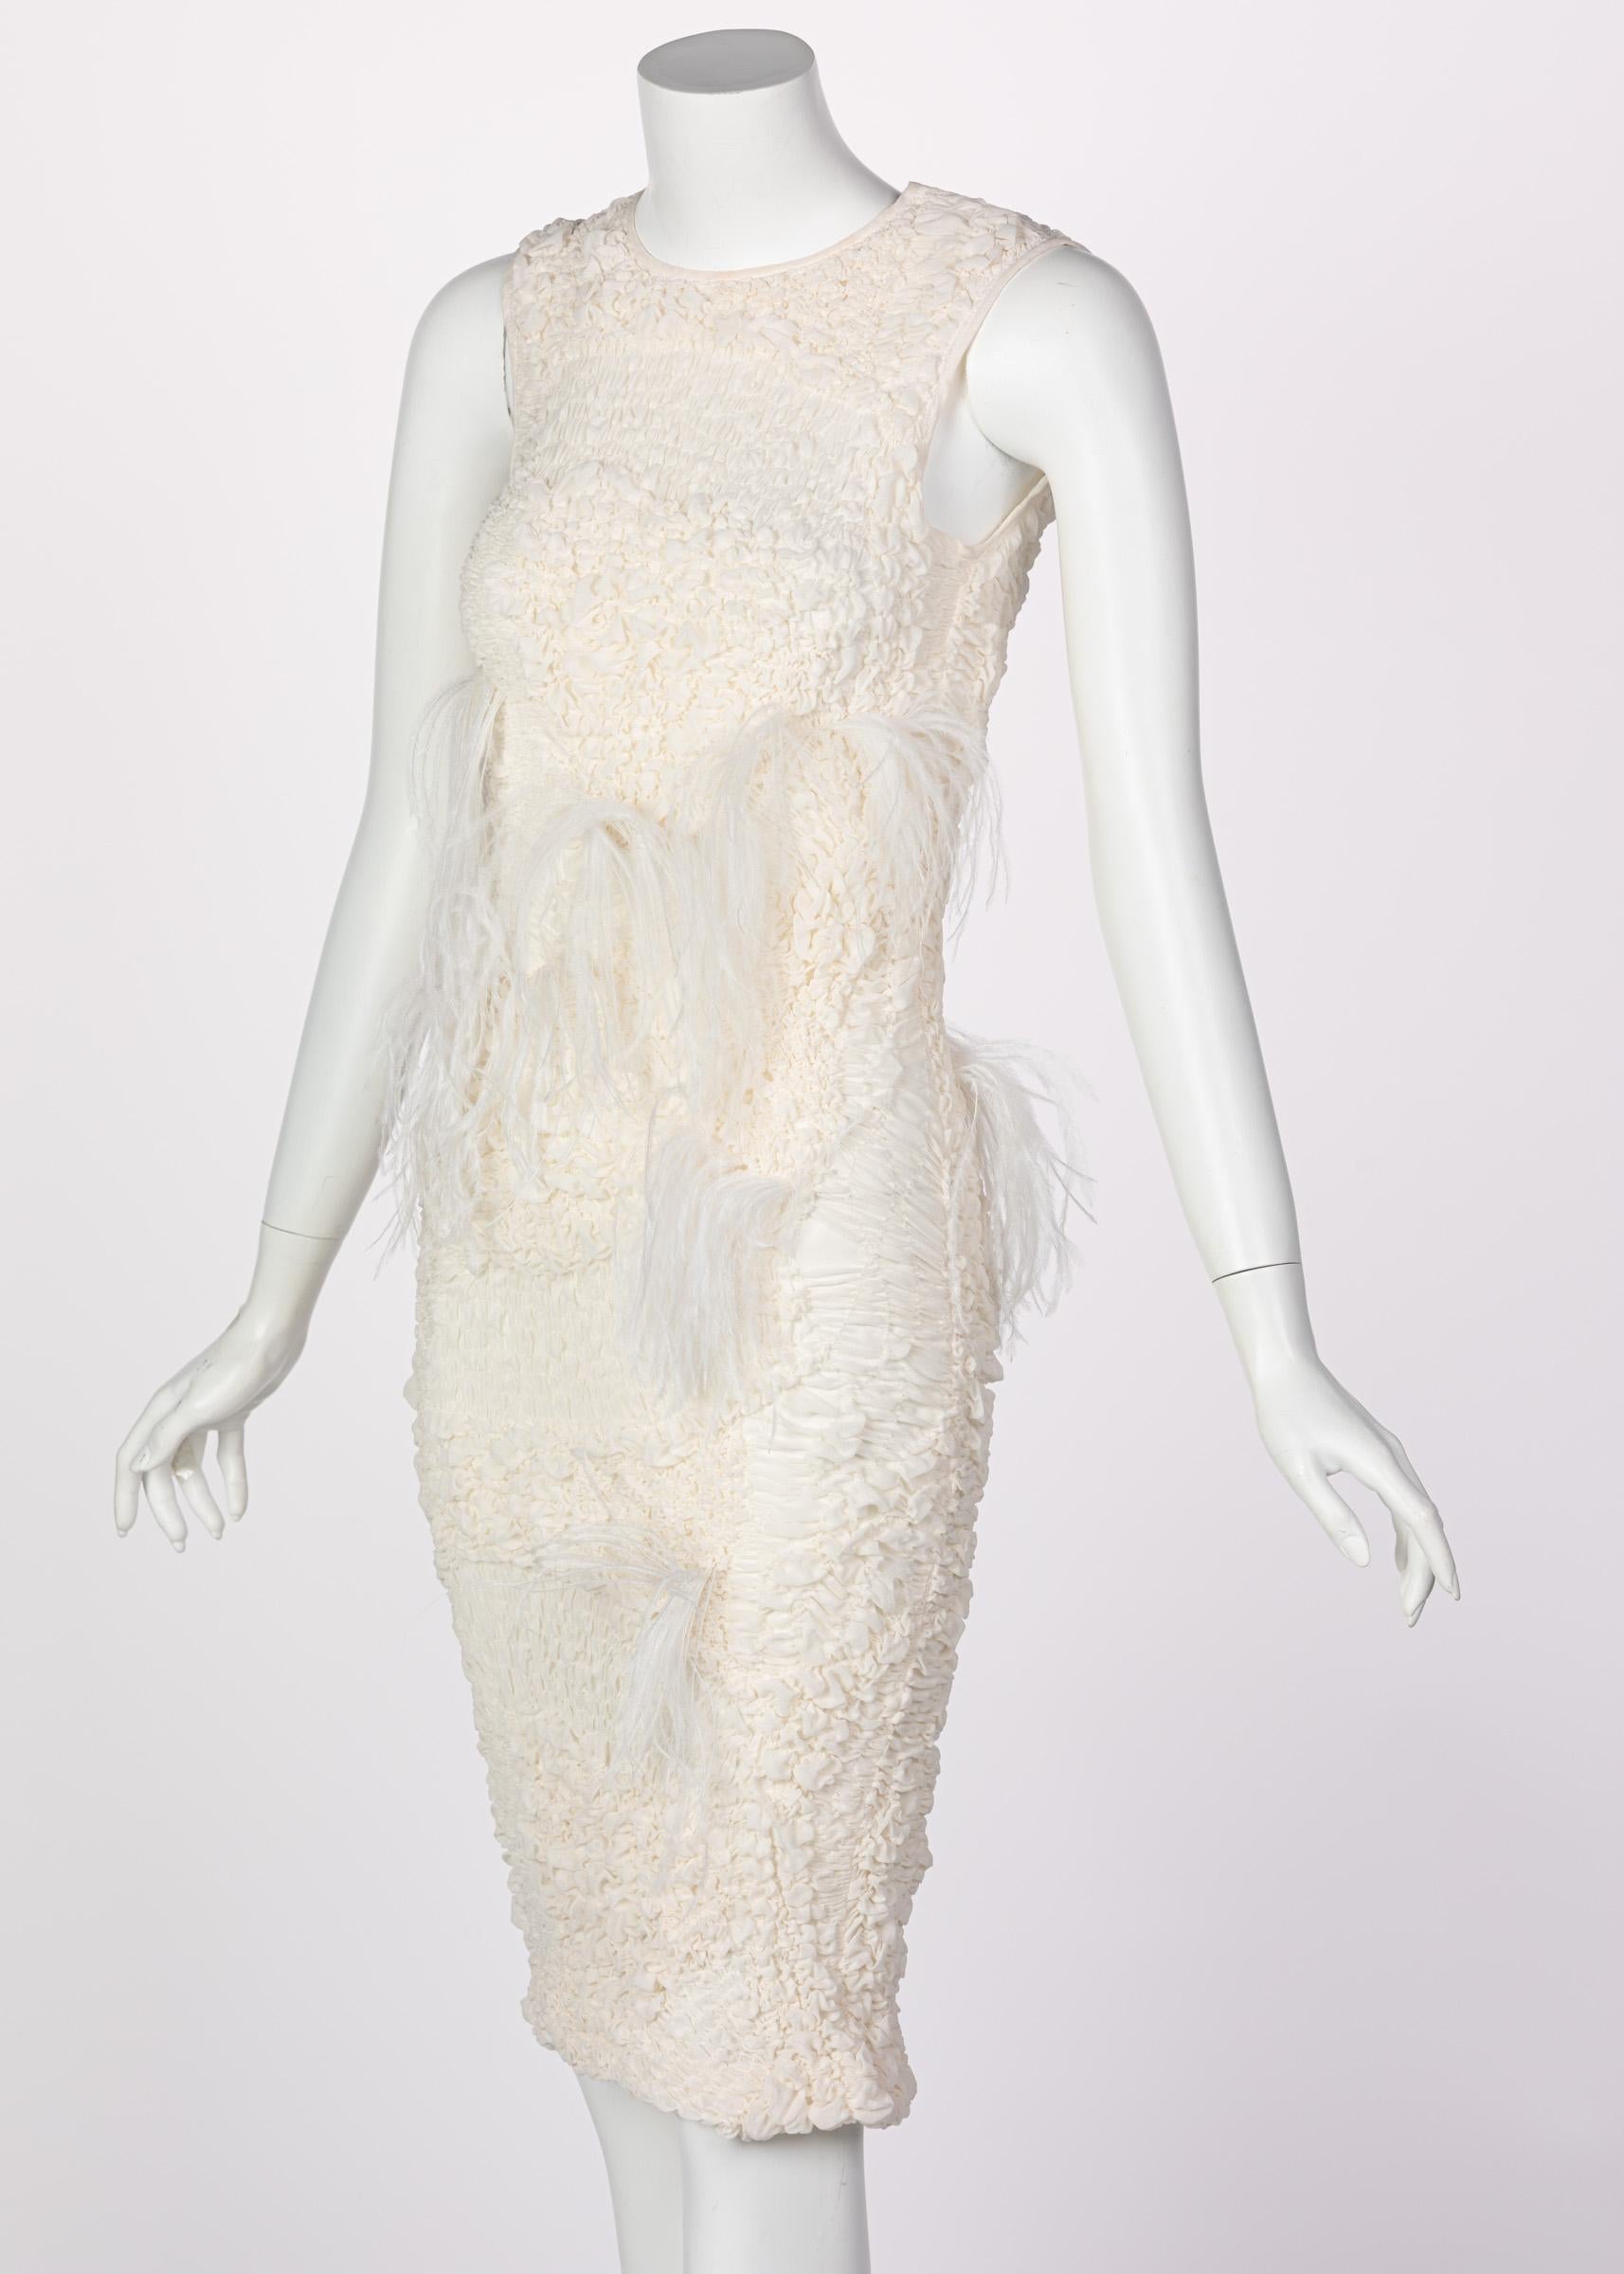 Nina Ricci Ivory Silk Feather Embellished Dress, Spring 2016 In Good Condition For Sale In Boca Raton, FL